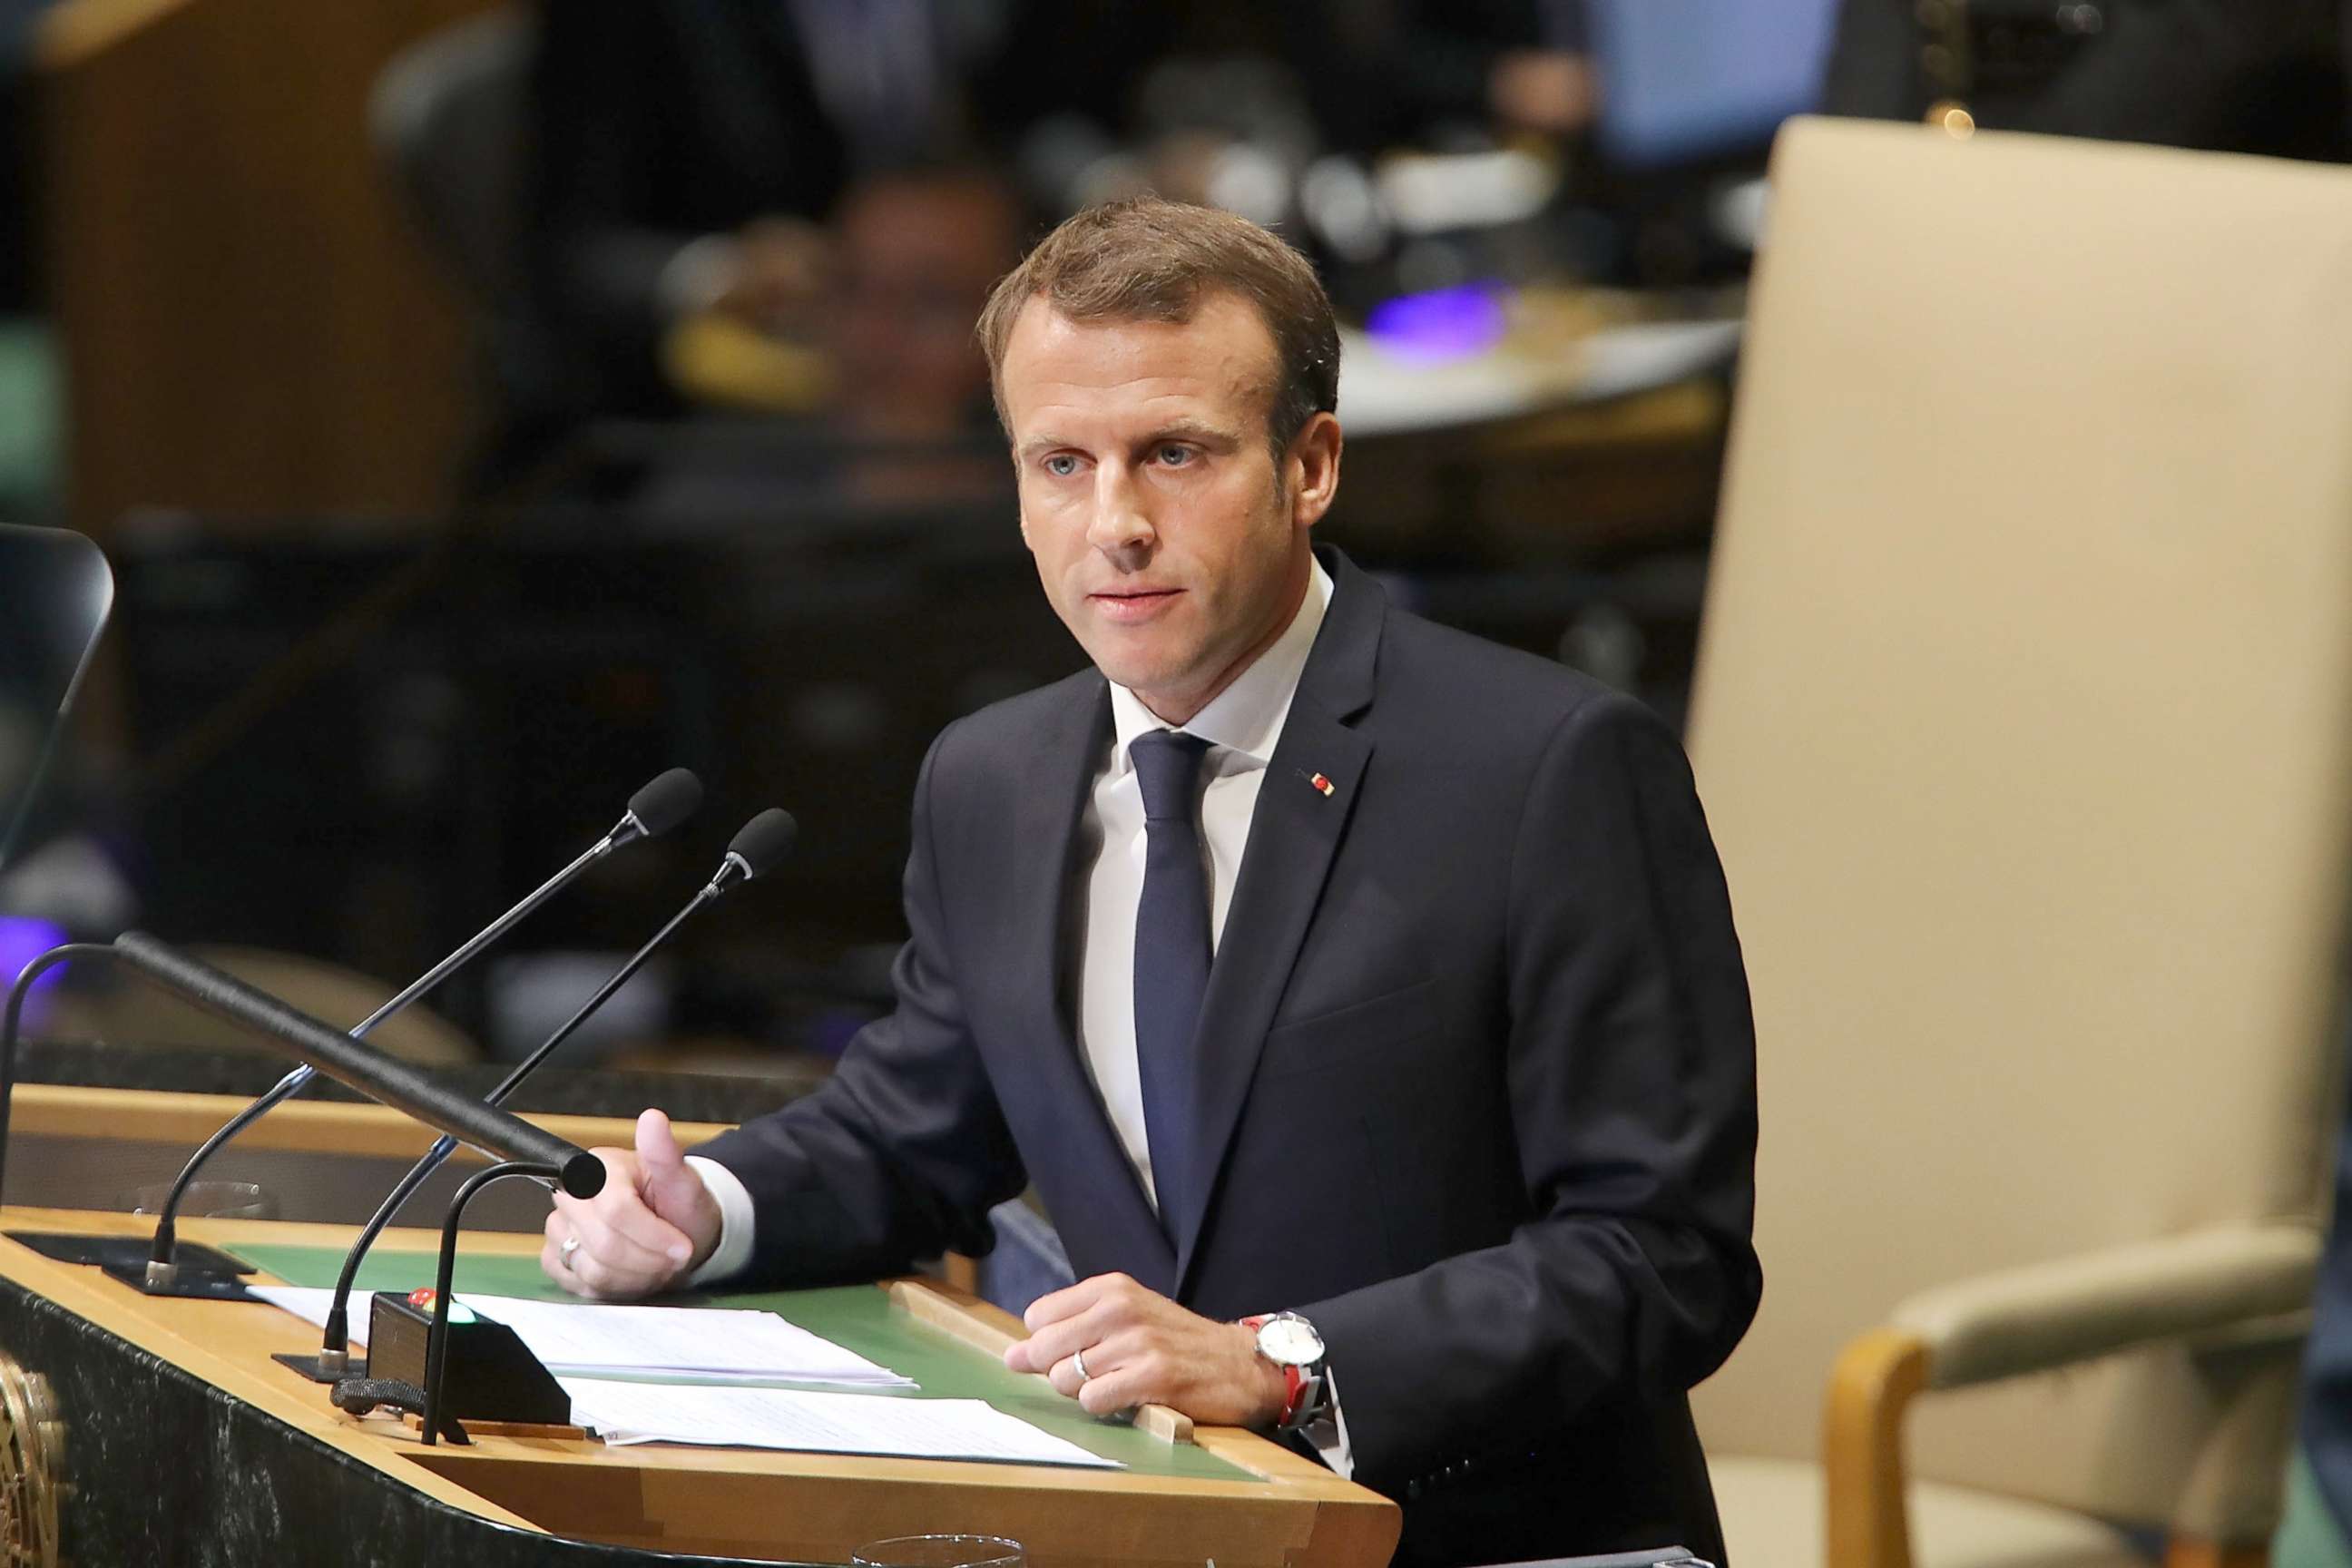 PHOTO: French President Emmanuel Macron addresses the 73rd United Nations General Assembly, Sept. 25, 2018, in New York City.